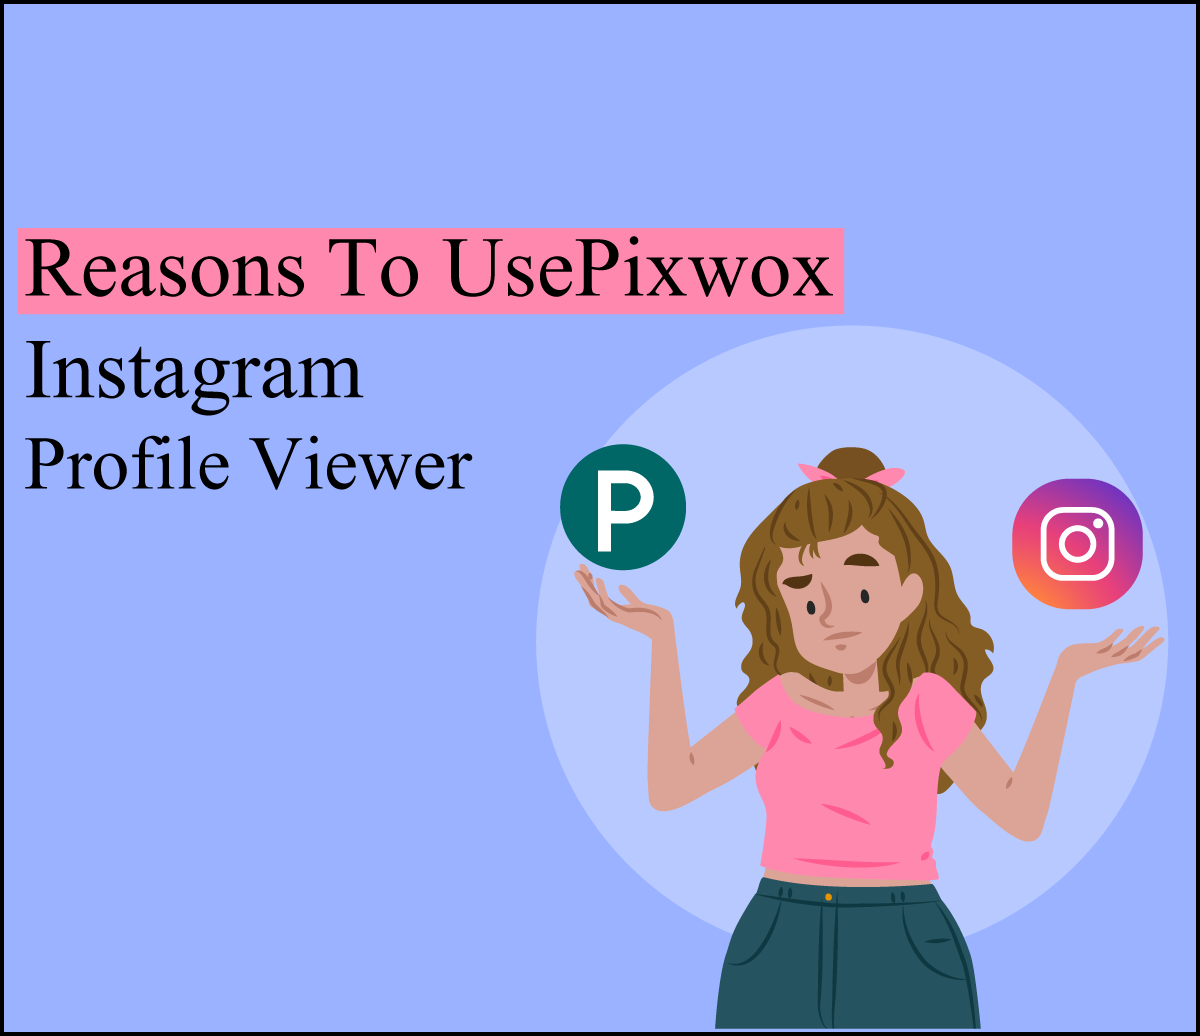 Reasons To Use Pixwox Instagram Profile Viewer